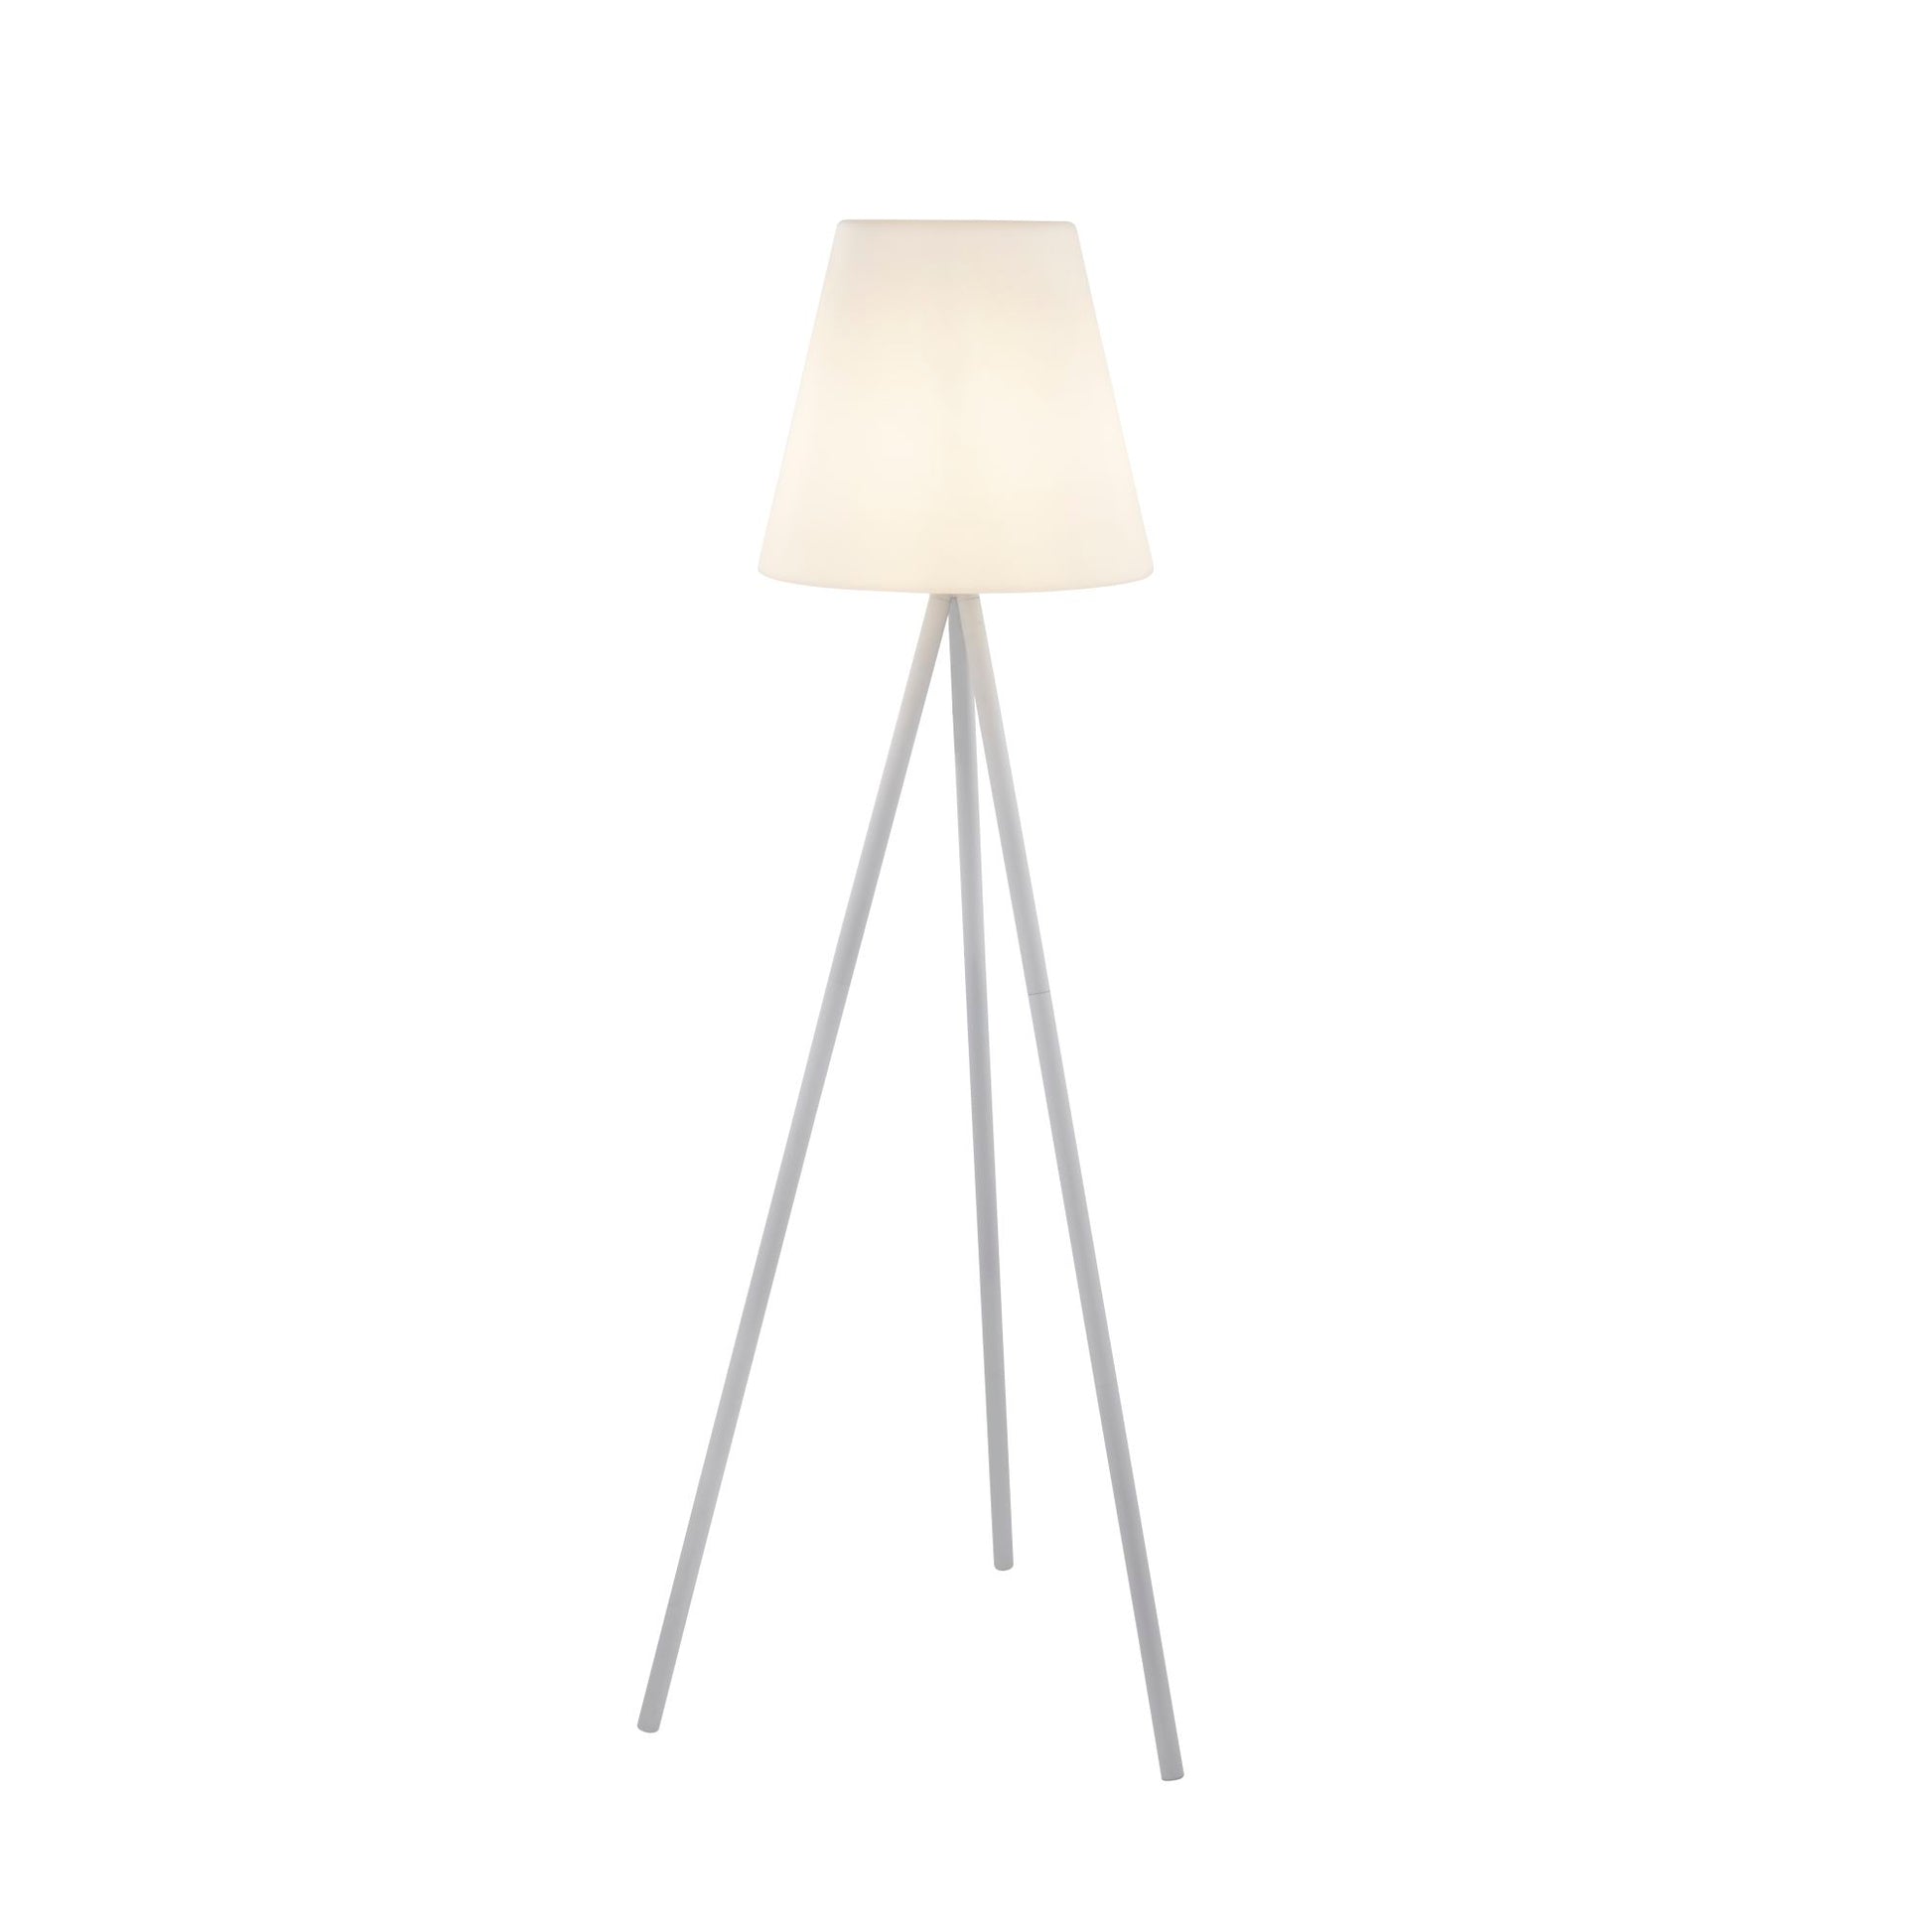 LED Outdoor Tripod Floor Lamp White White Pc Tapered Shade